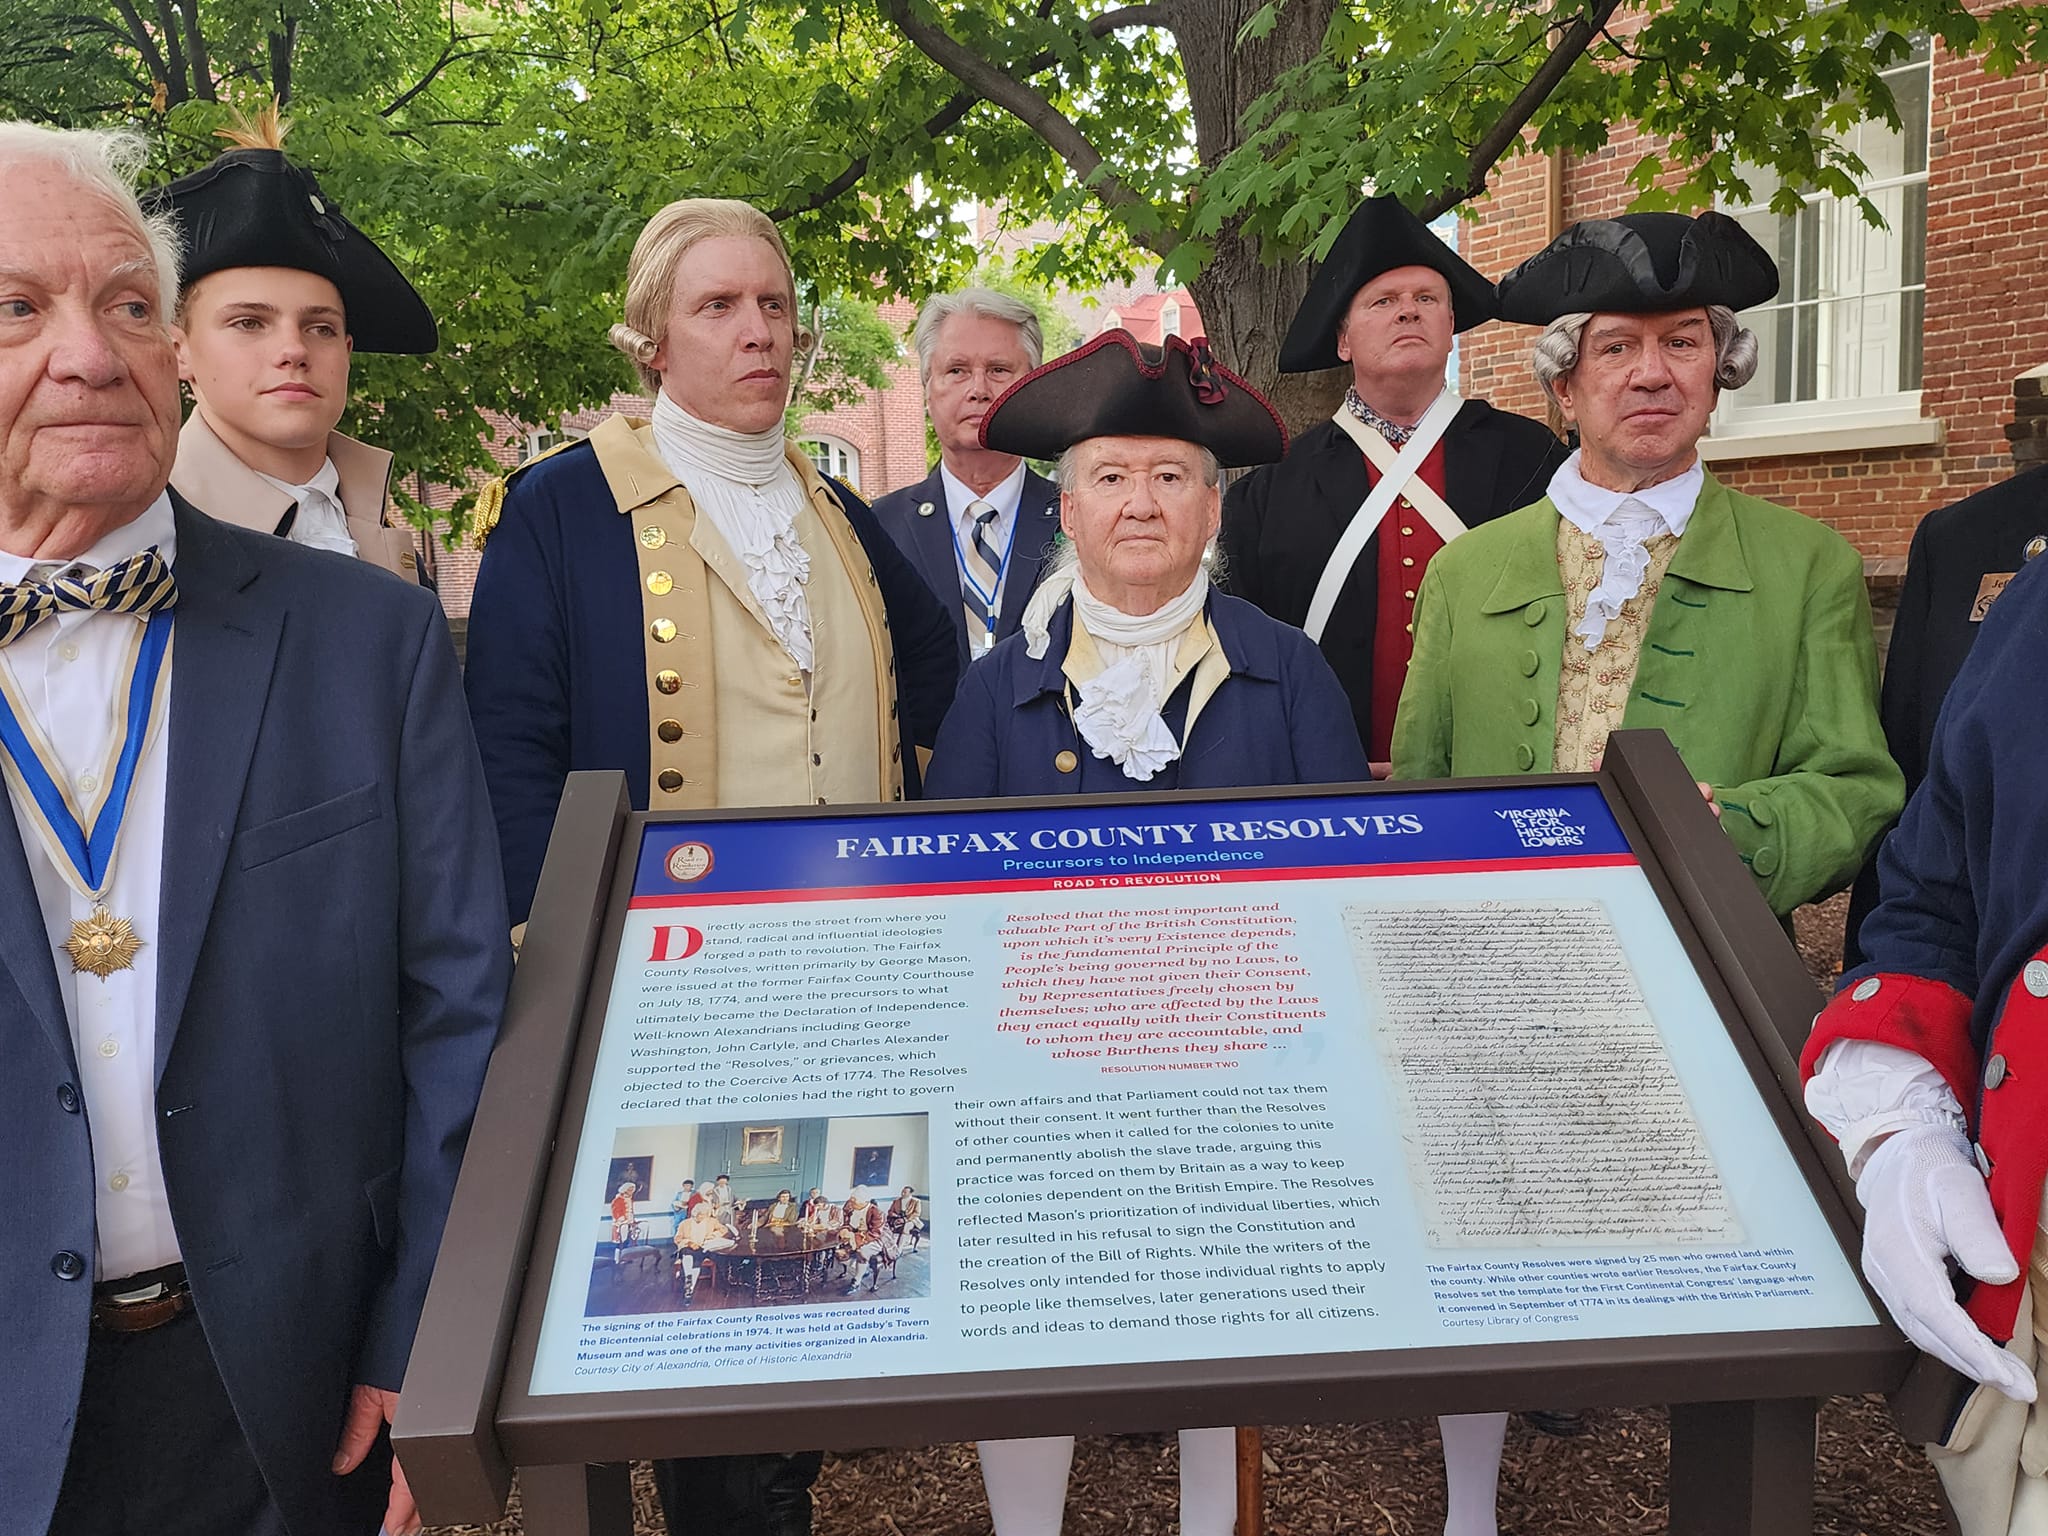 Hundreds Gather in Alexandria, Virginia for Historic 250th Anniversary of Fairfax Resolves